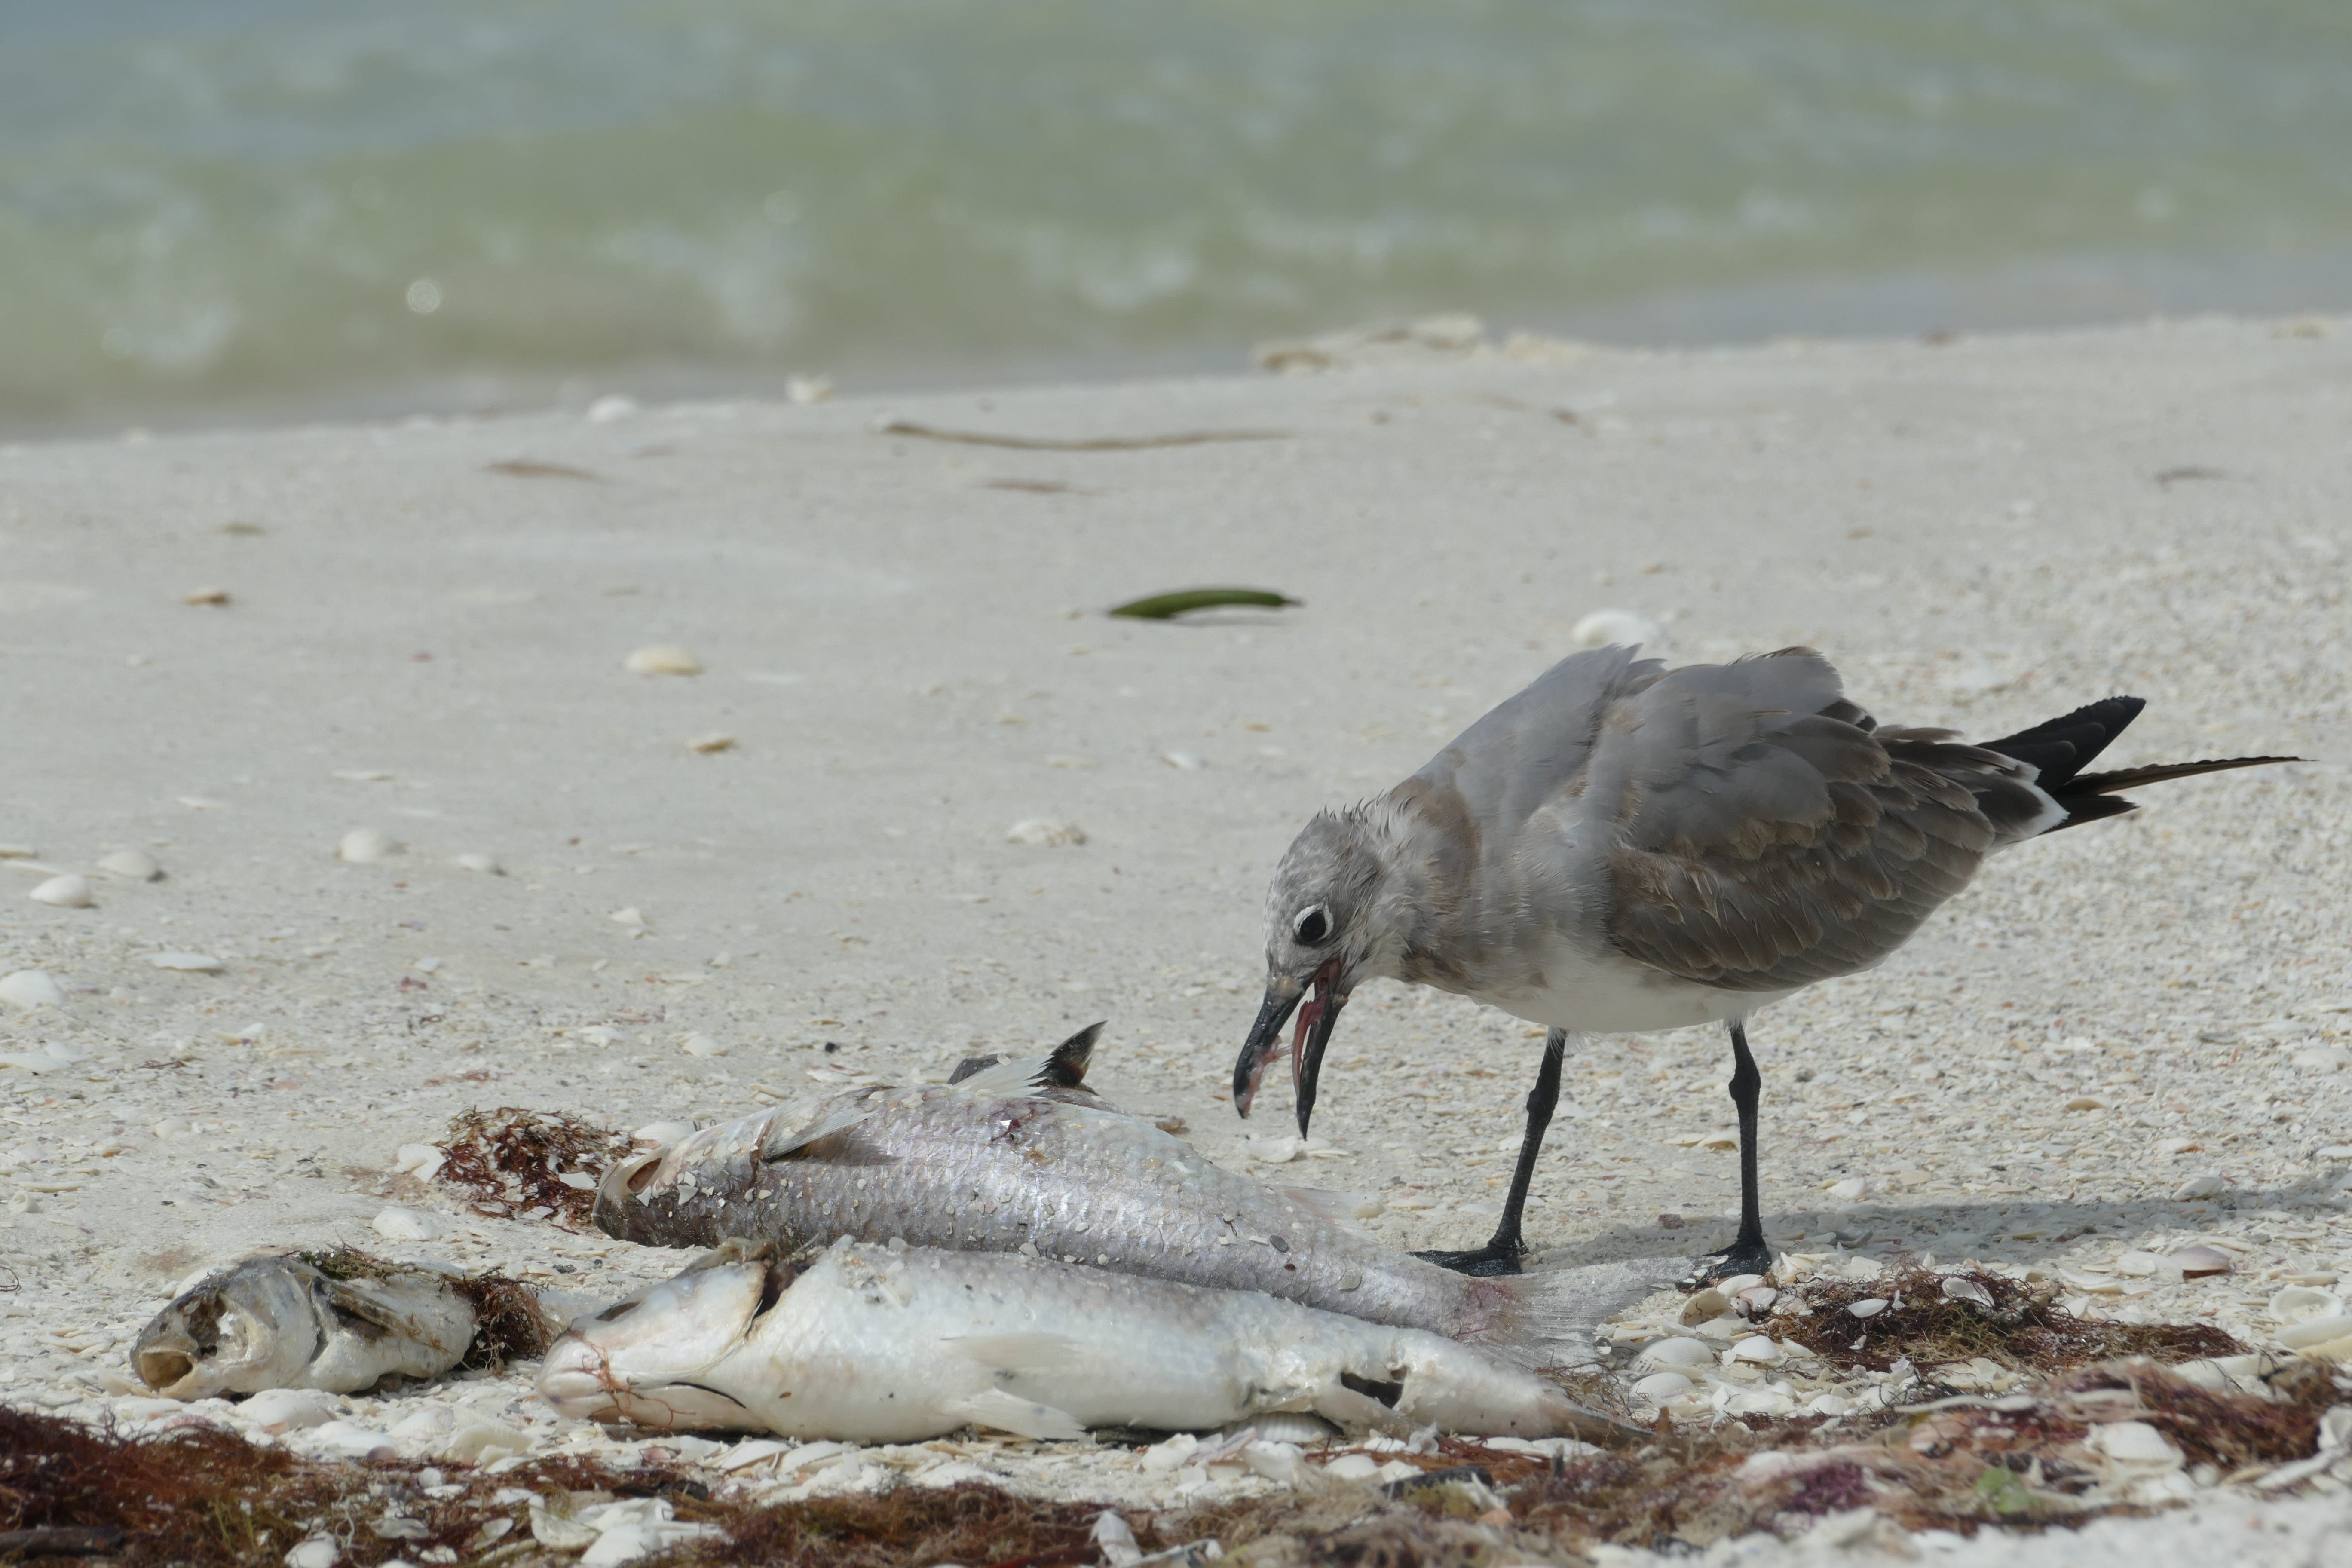 A bird eats a dead fish on South Beach, Marco Island,  on Oct. 9. Dozens of dead fish washed ashore Wednesday on Marco Island as government agencies alerted of high levels of the organism that causes the red tide.